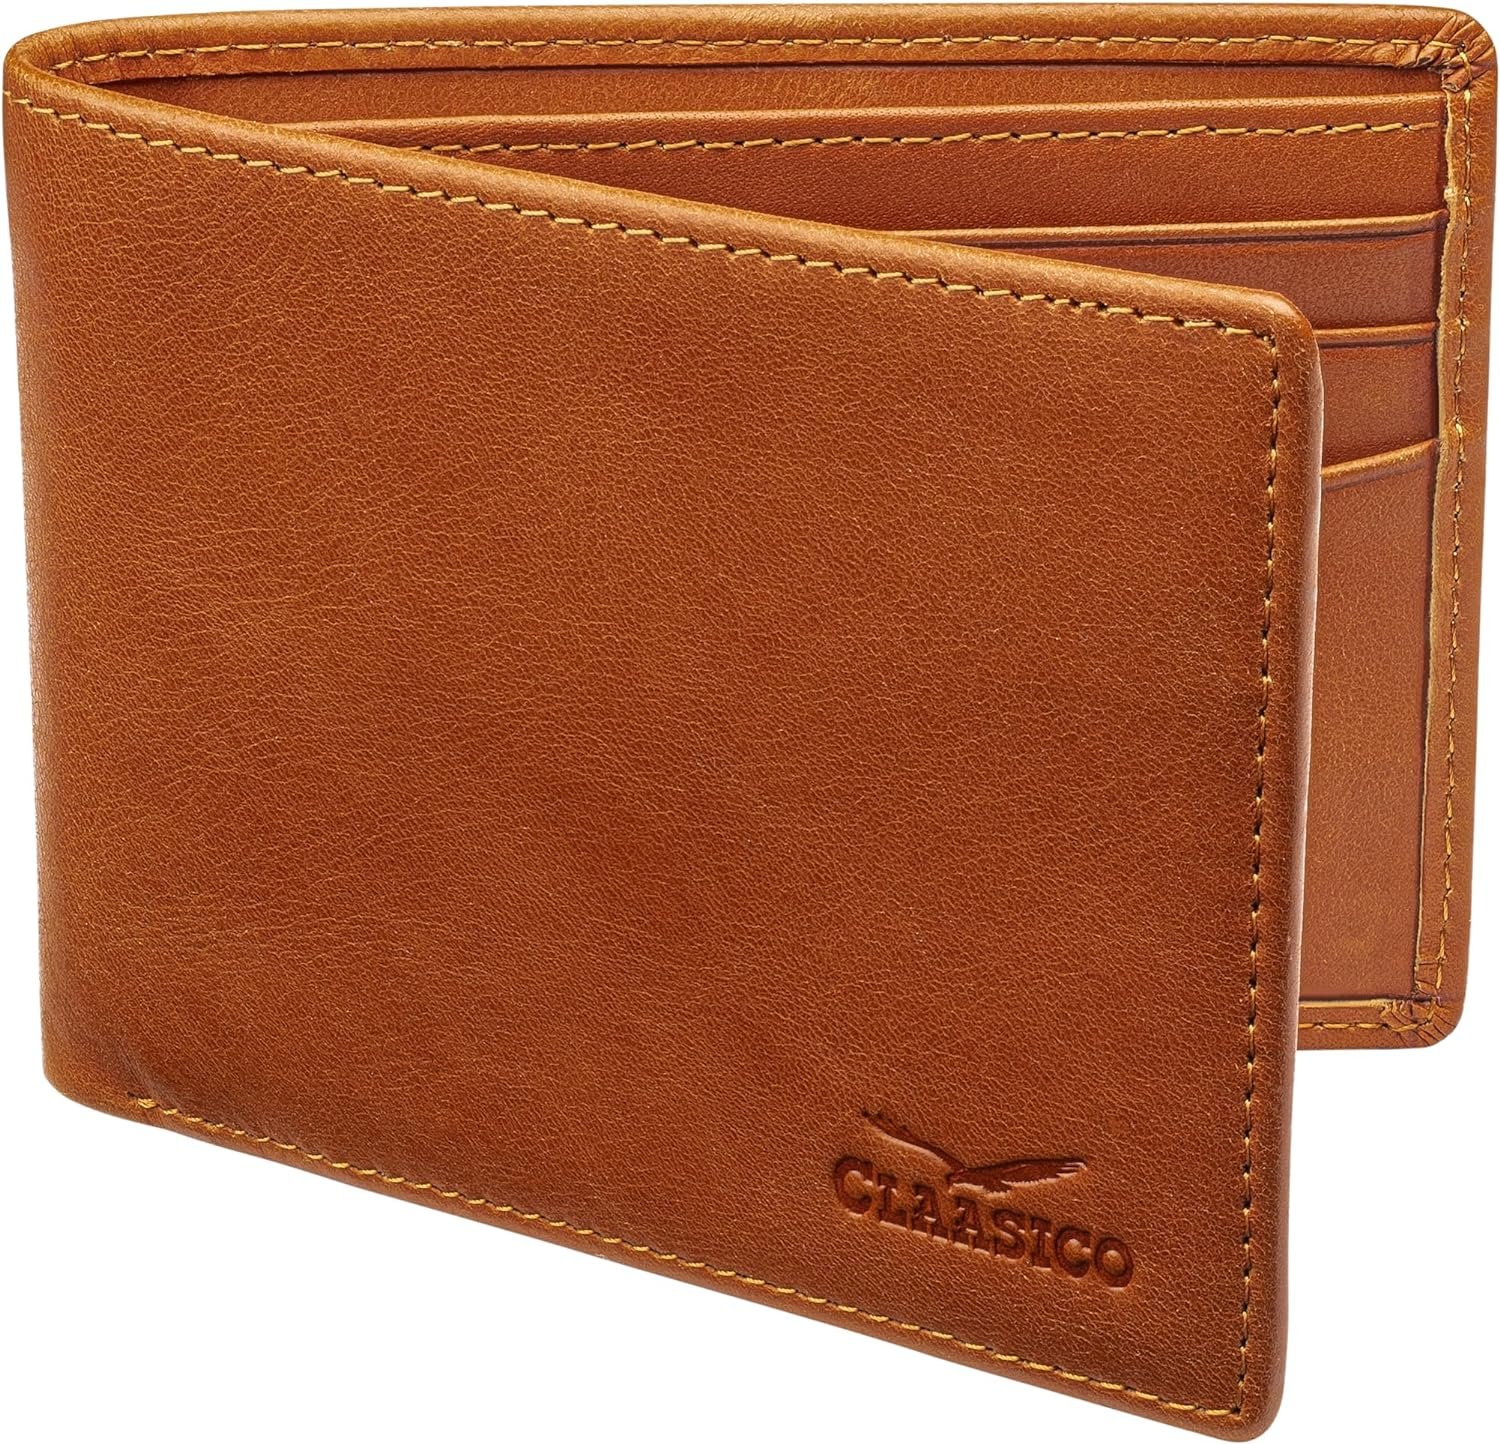 Men’s Leather Wallet Review